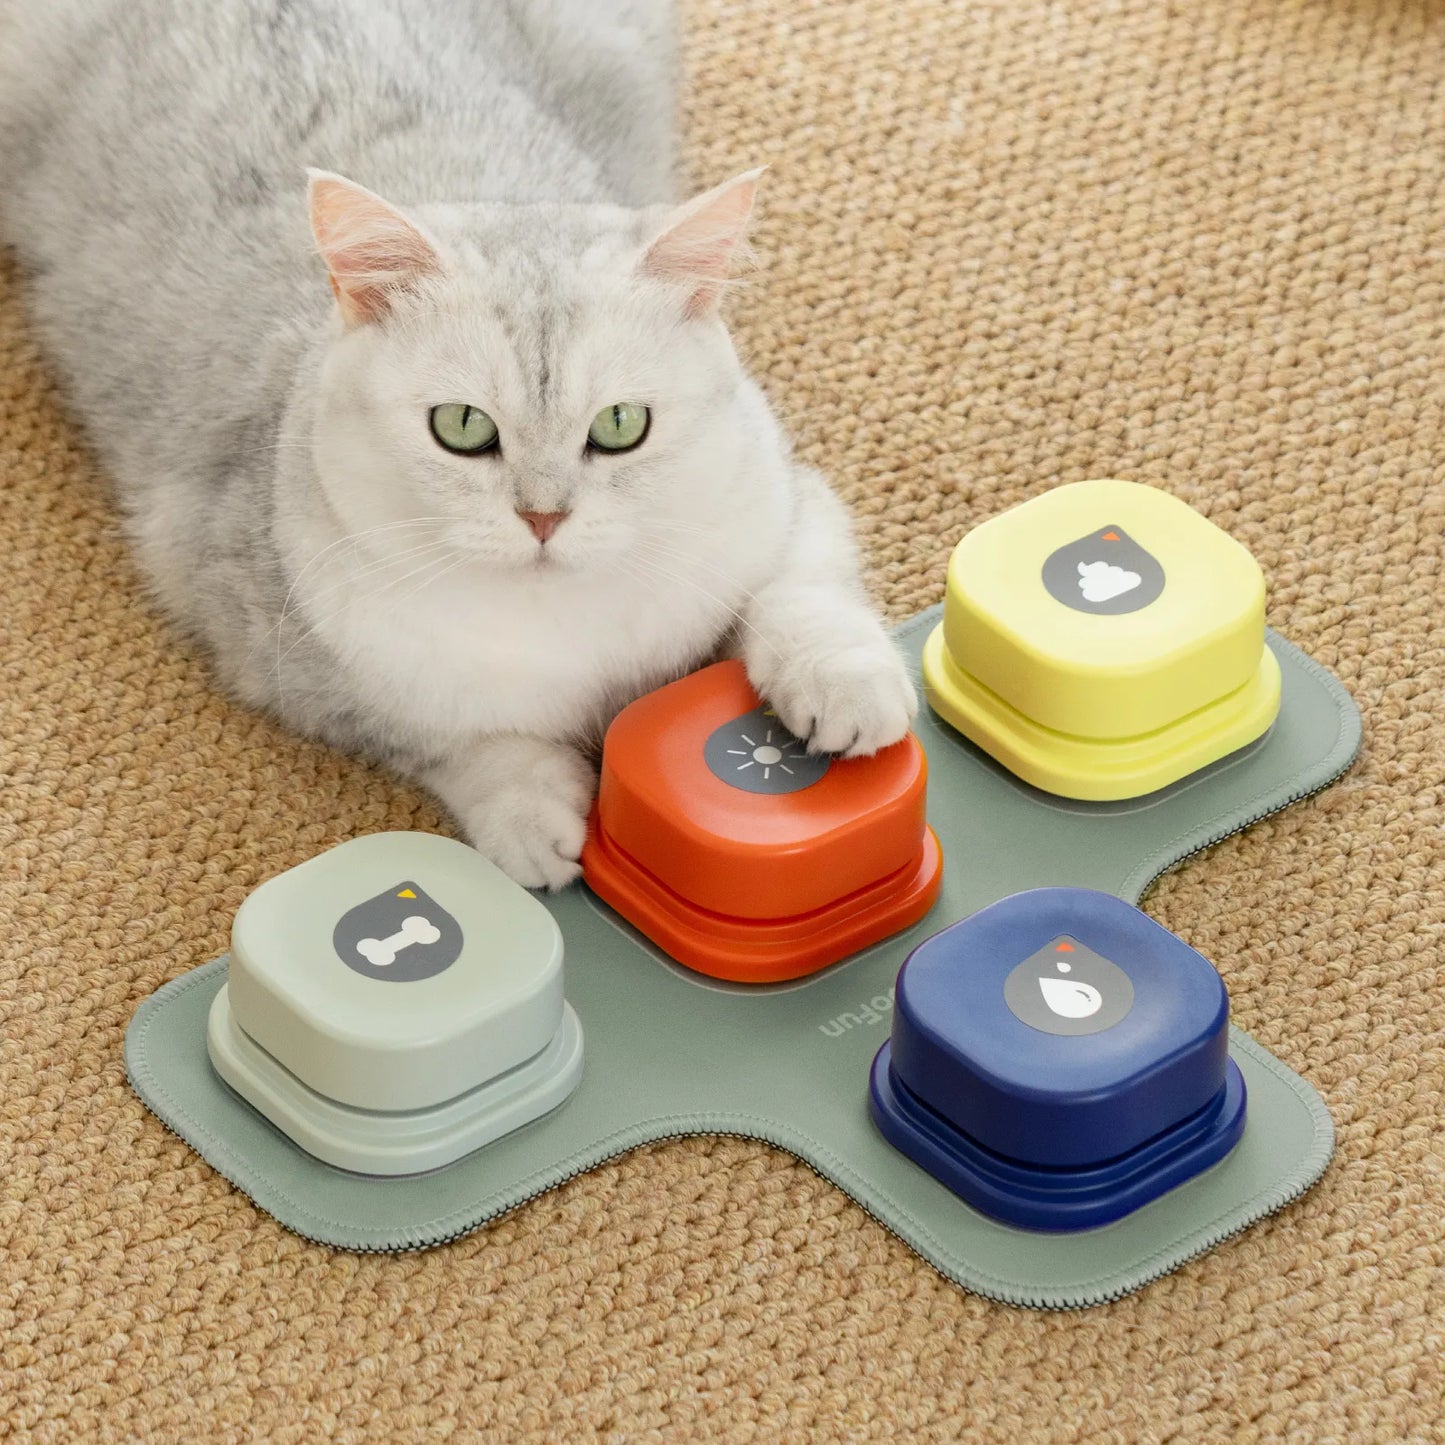 MEWOOFUN Dog Button Record Talking Pet Communication Vocal Training Interactive Toy Bell Ringer With Pad and Sticker Easy To Use